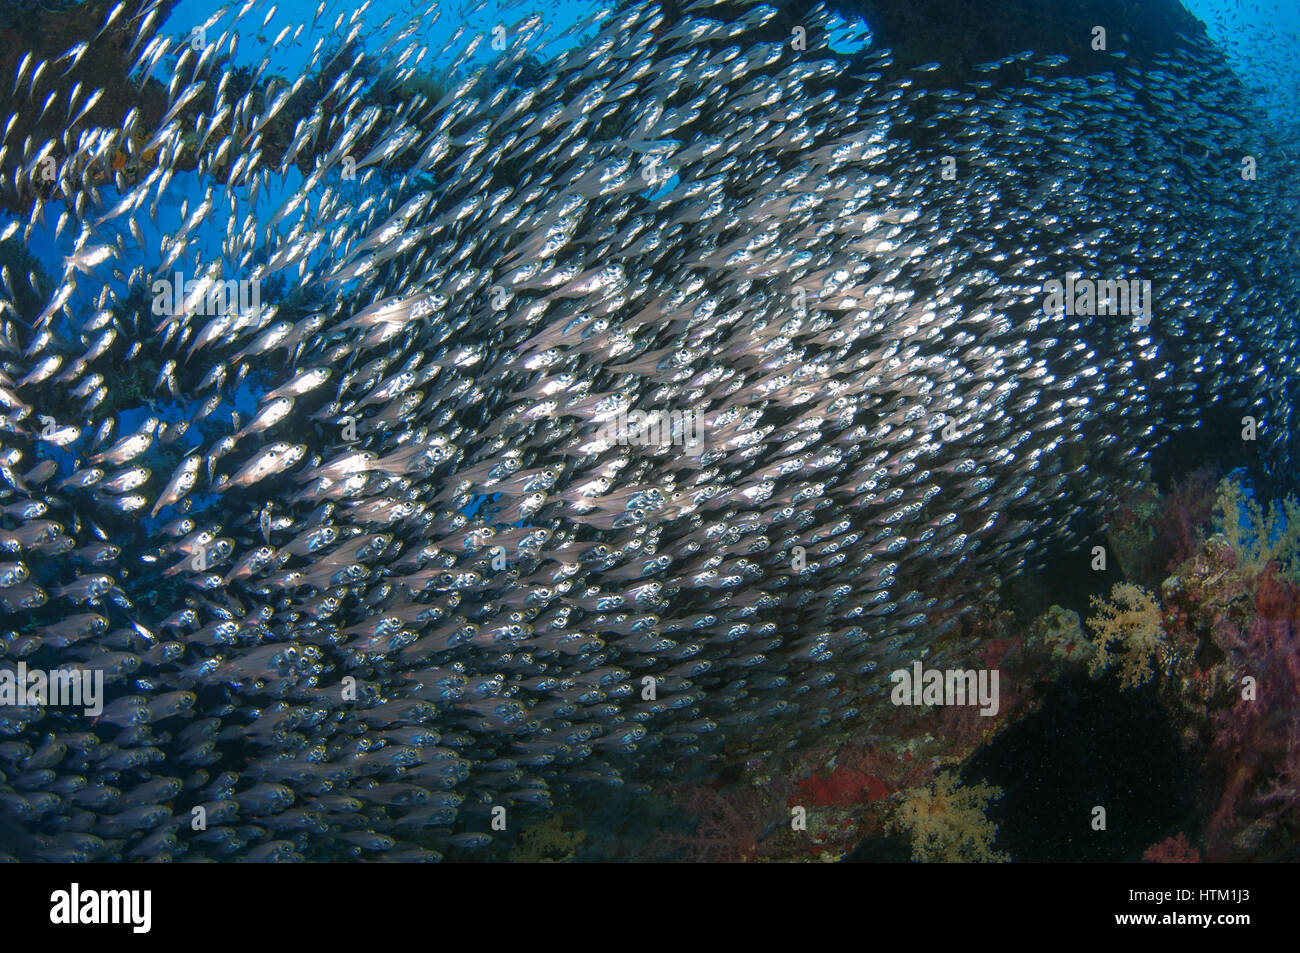 large school of fish Pigmy Sweepers (Parapriacanthus ransonneti) on shipwreck background, Red Sea, Egypt Stock Photo